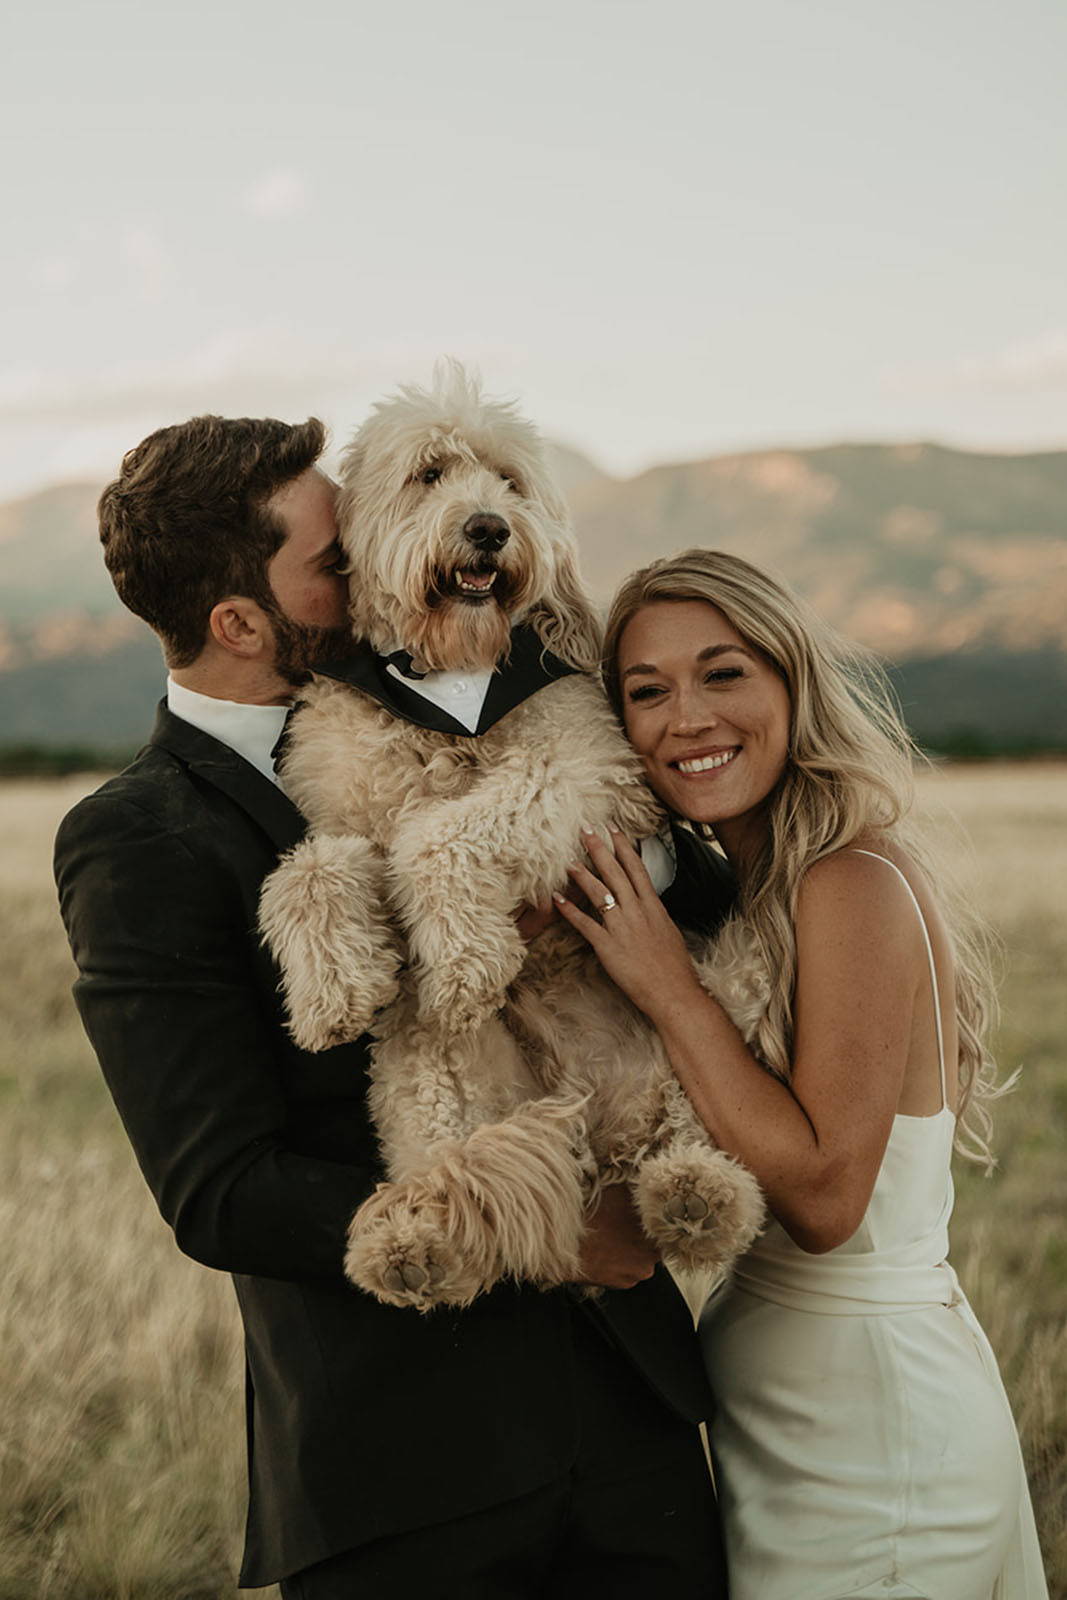 Bride and groom with their cute dog